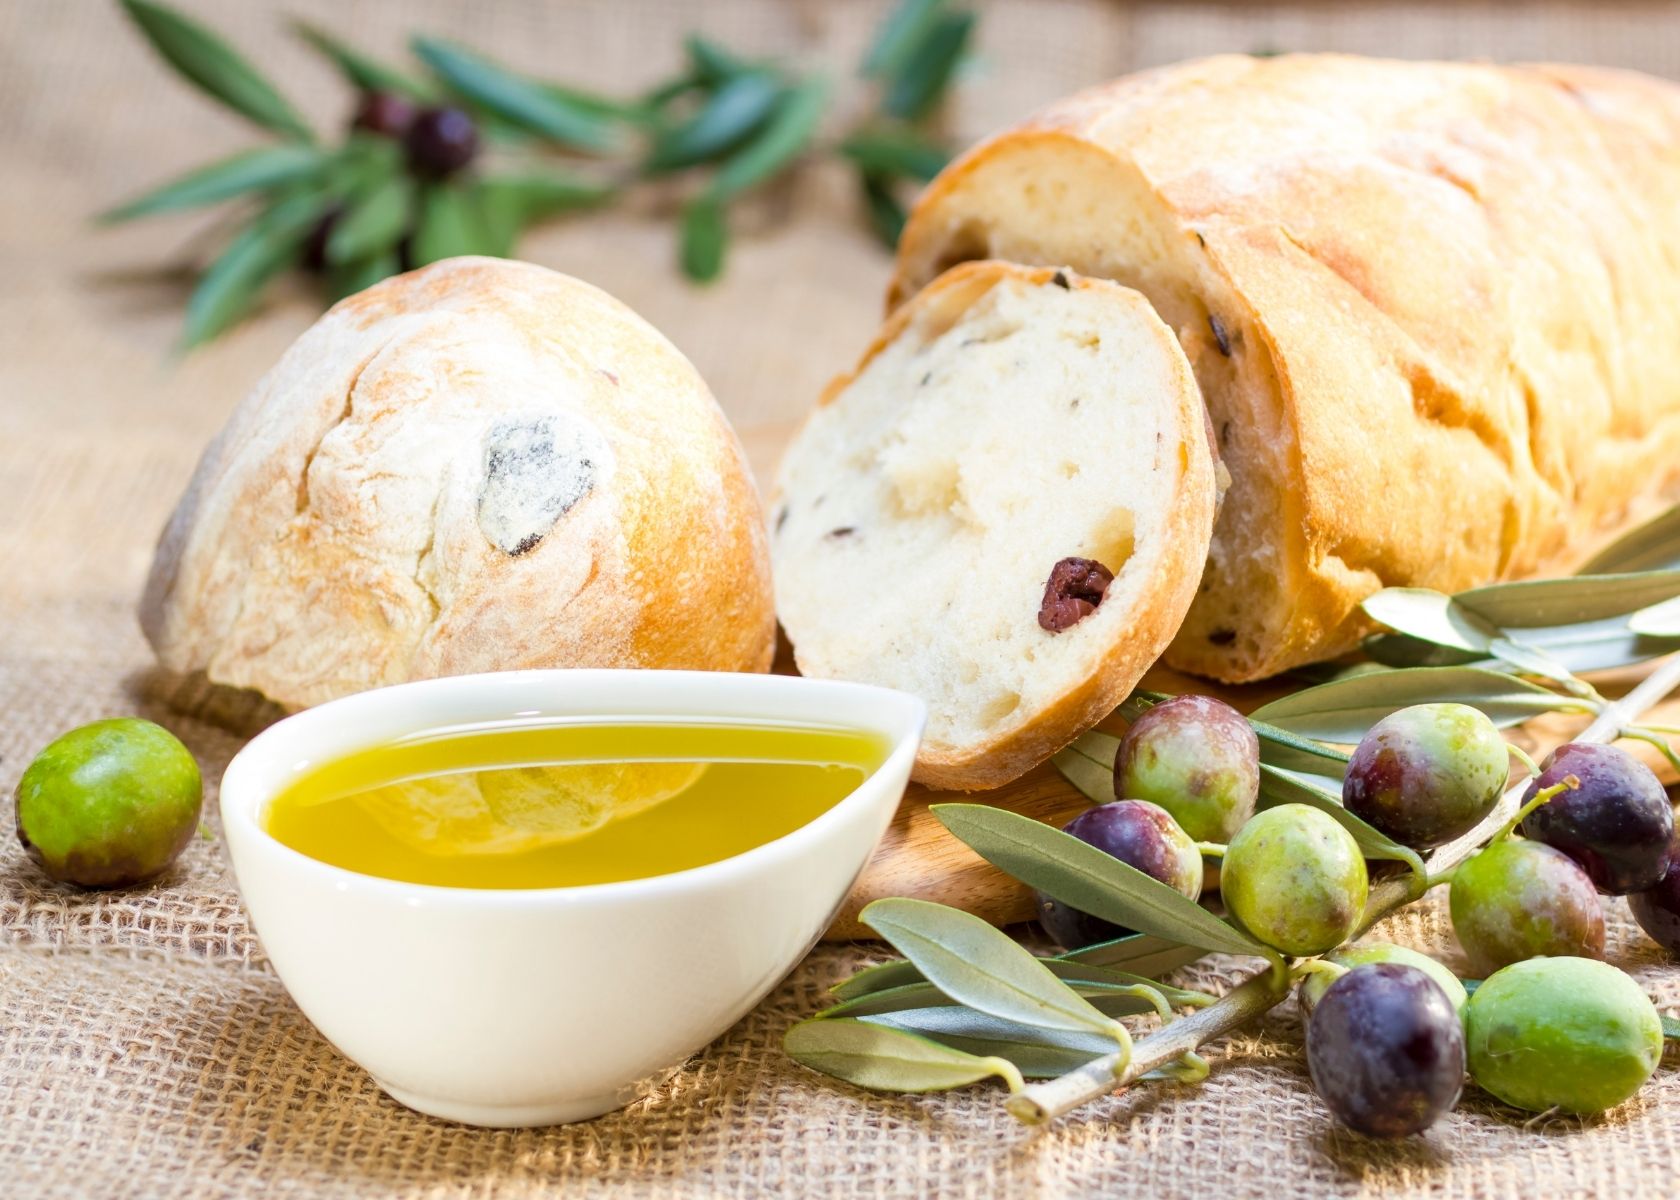 Olive oil next to crusty rustic bread with whole green and purple olives.